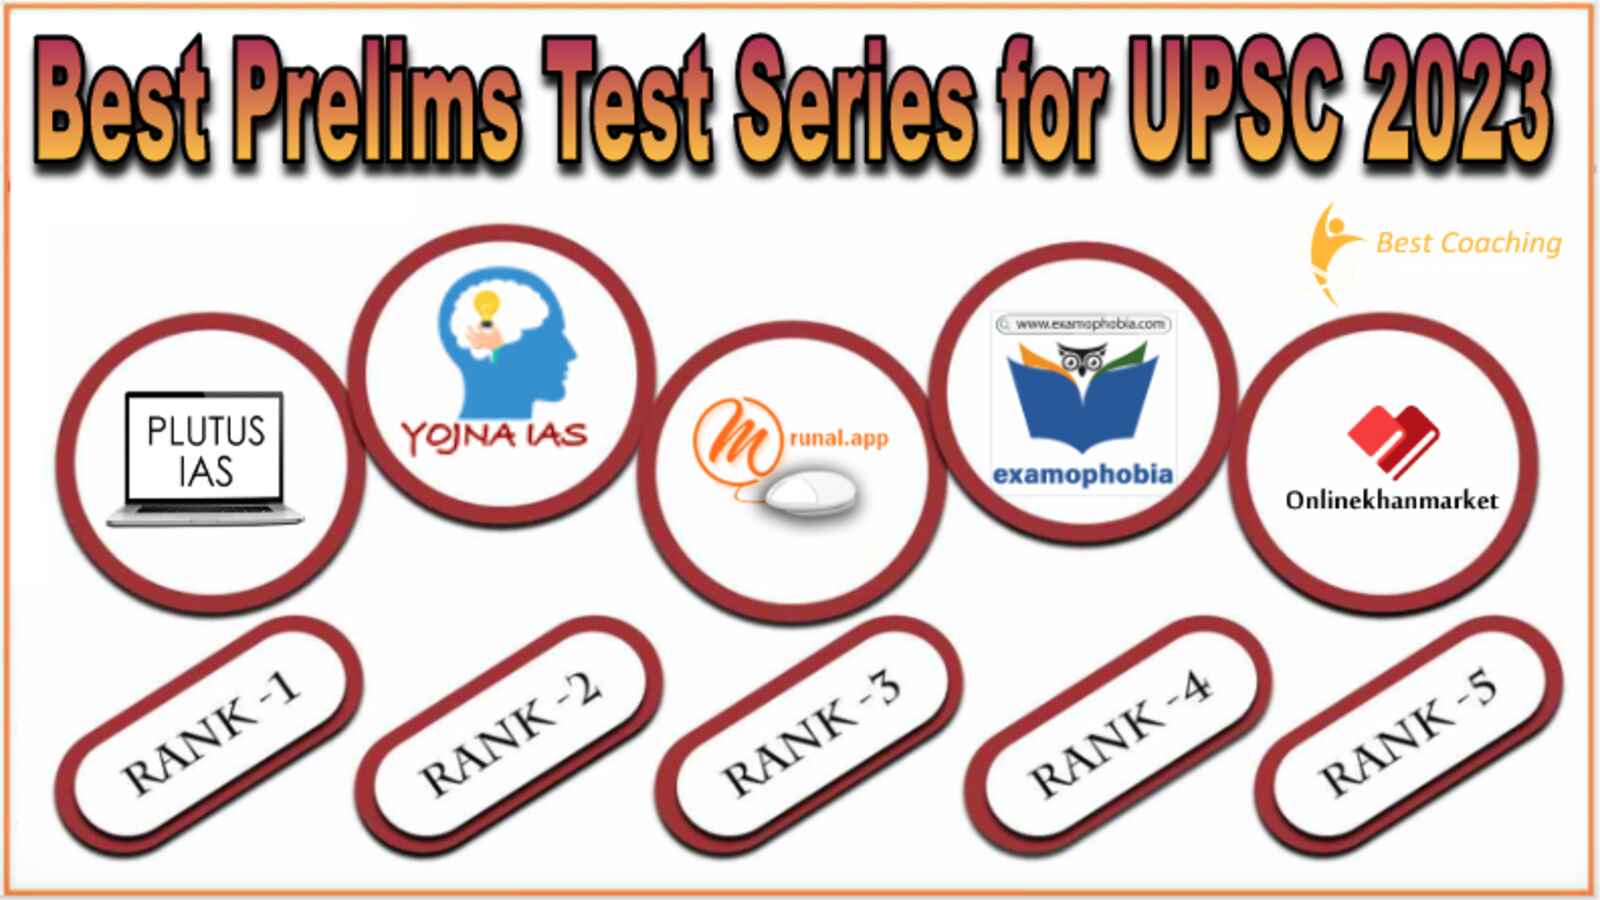 Best Prelims Test Series for UPSC 2023